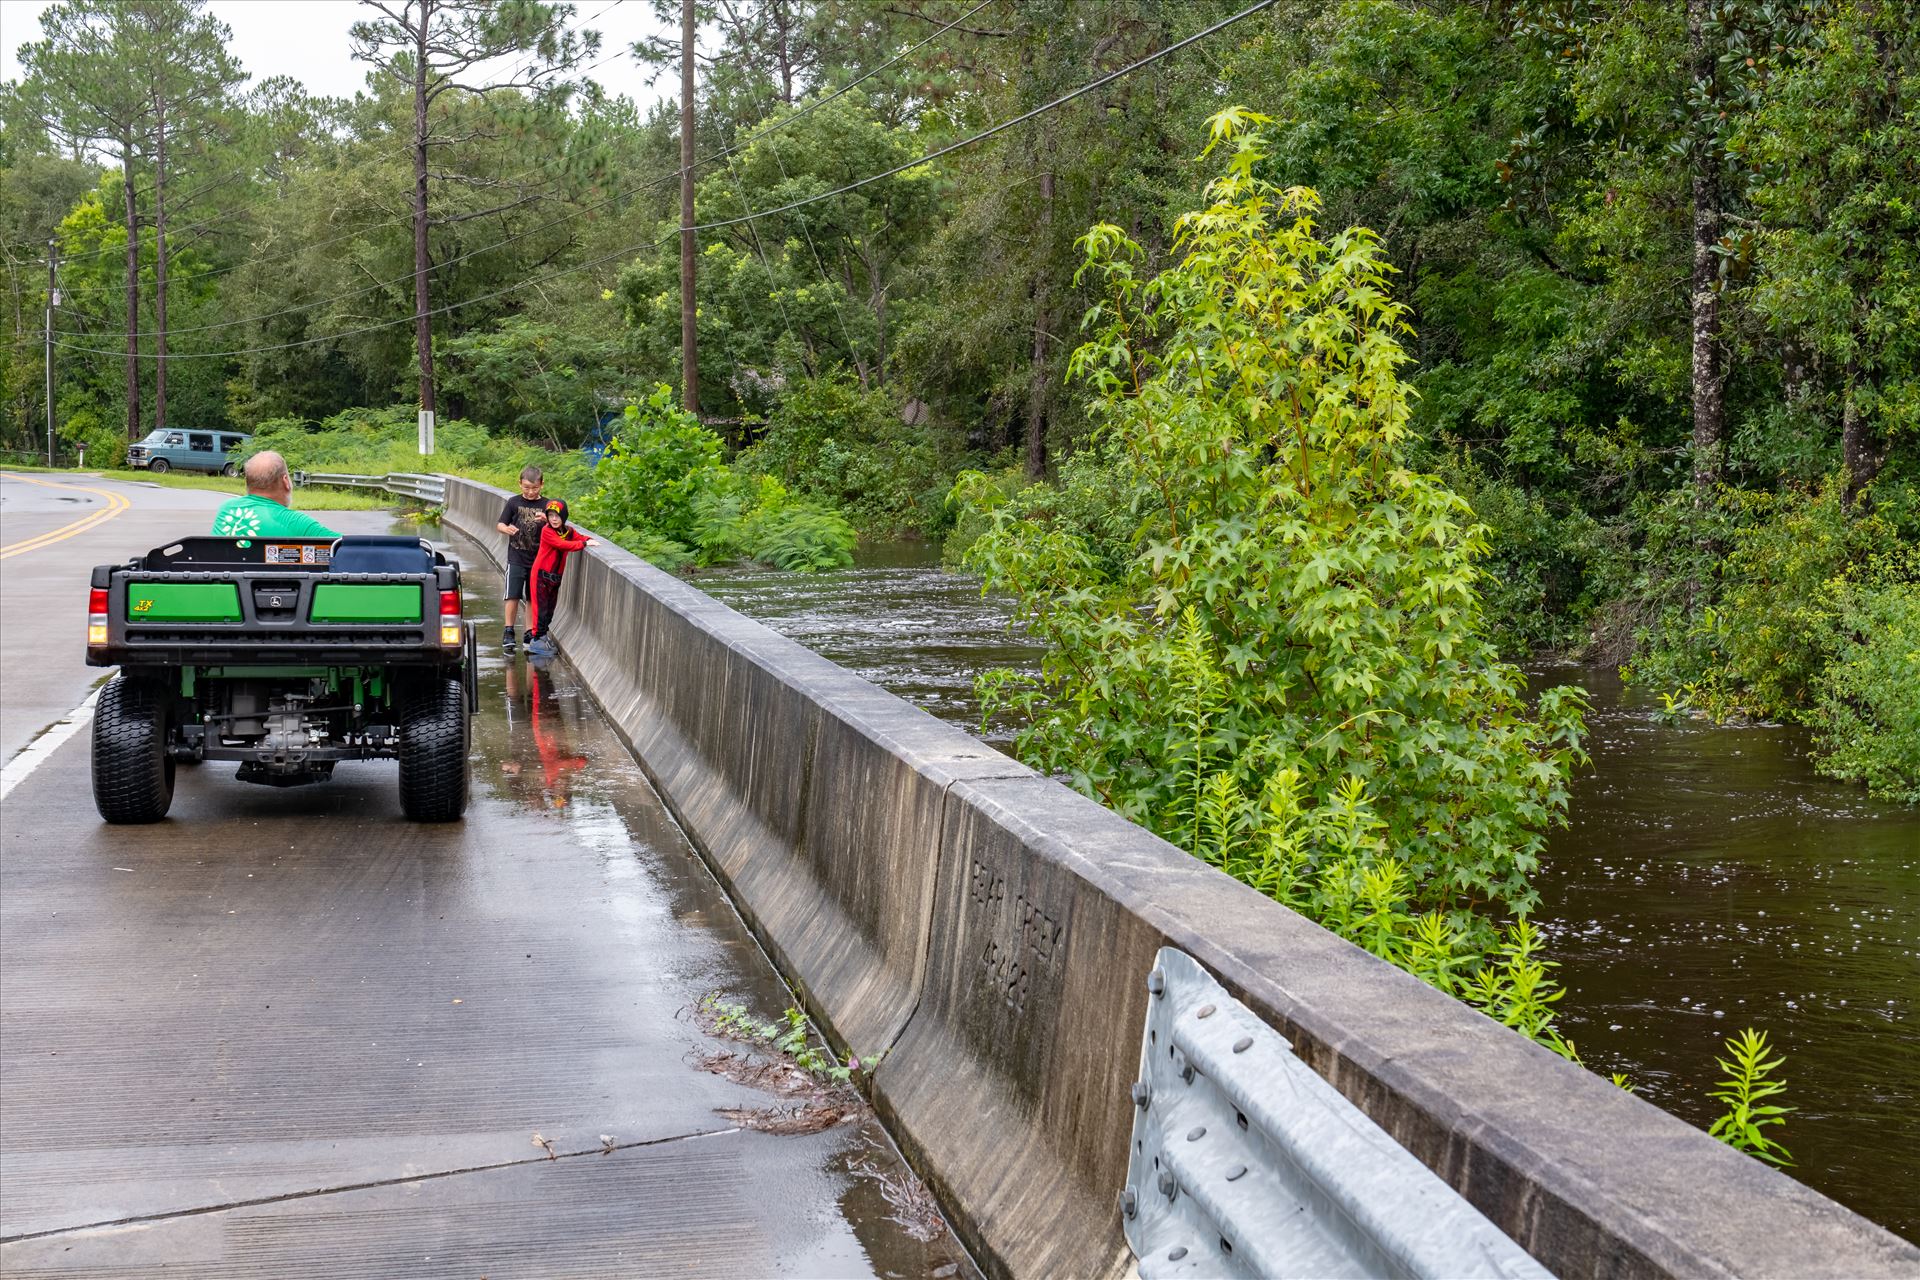 bear creek out of bank 4 August 02, 2018.jpg - August 02, 2018 heavy rains flooded many parts of Bay County, Florida. This photo is in the Bear Creek area. by Terry Kelly Photography